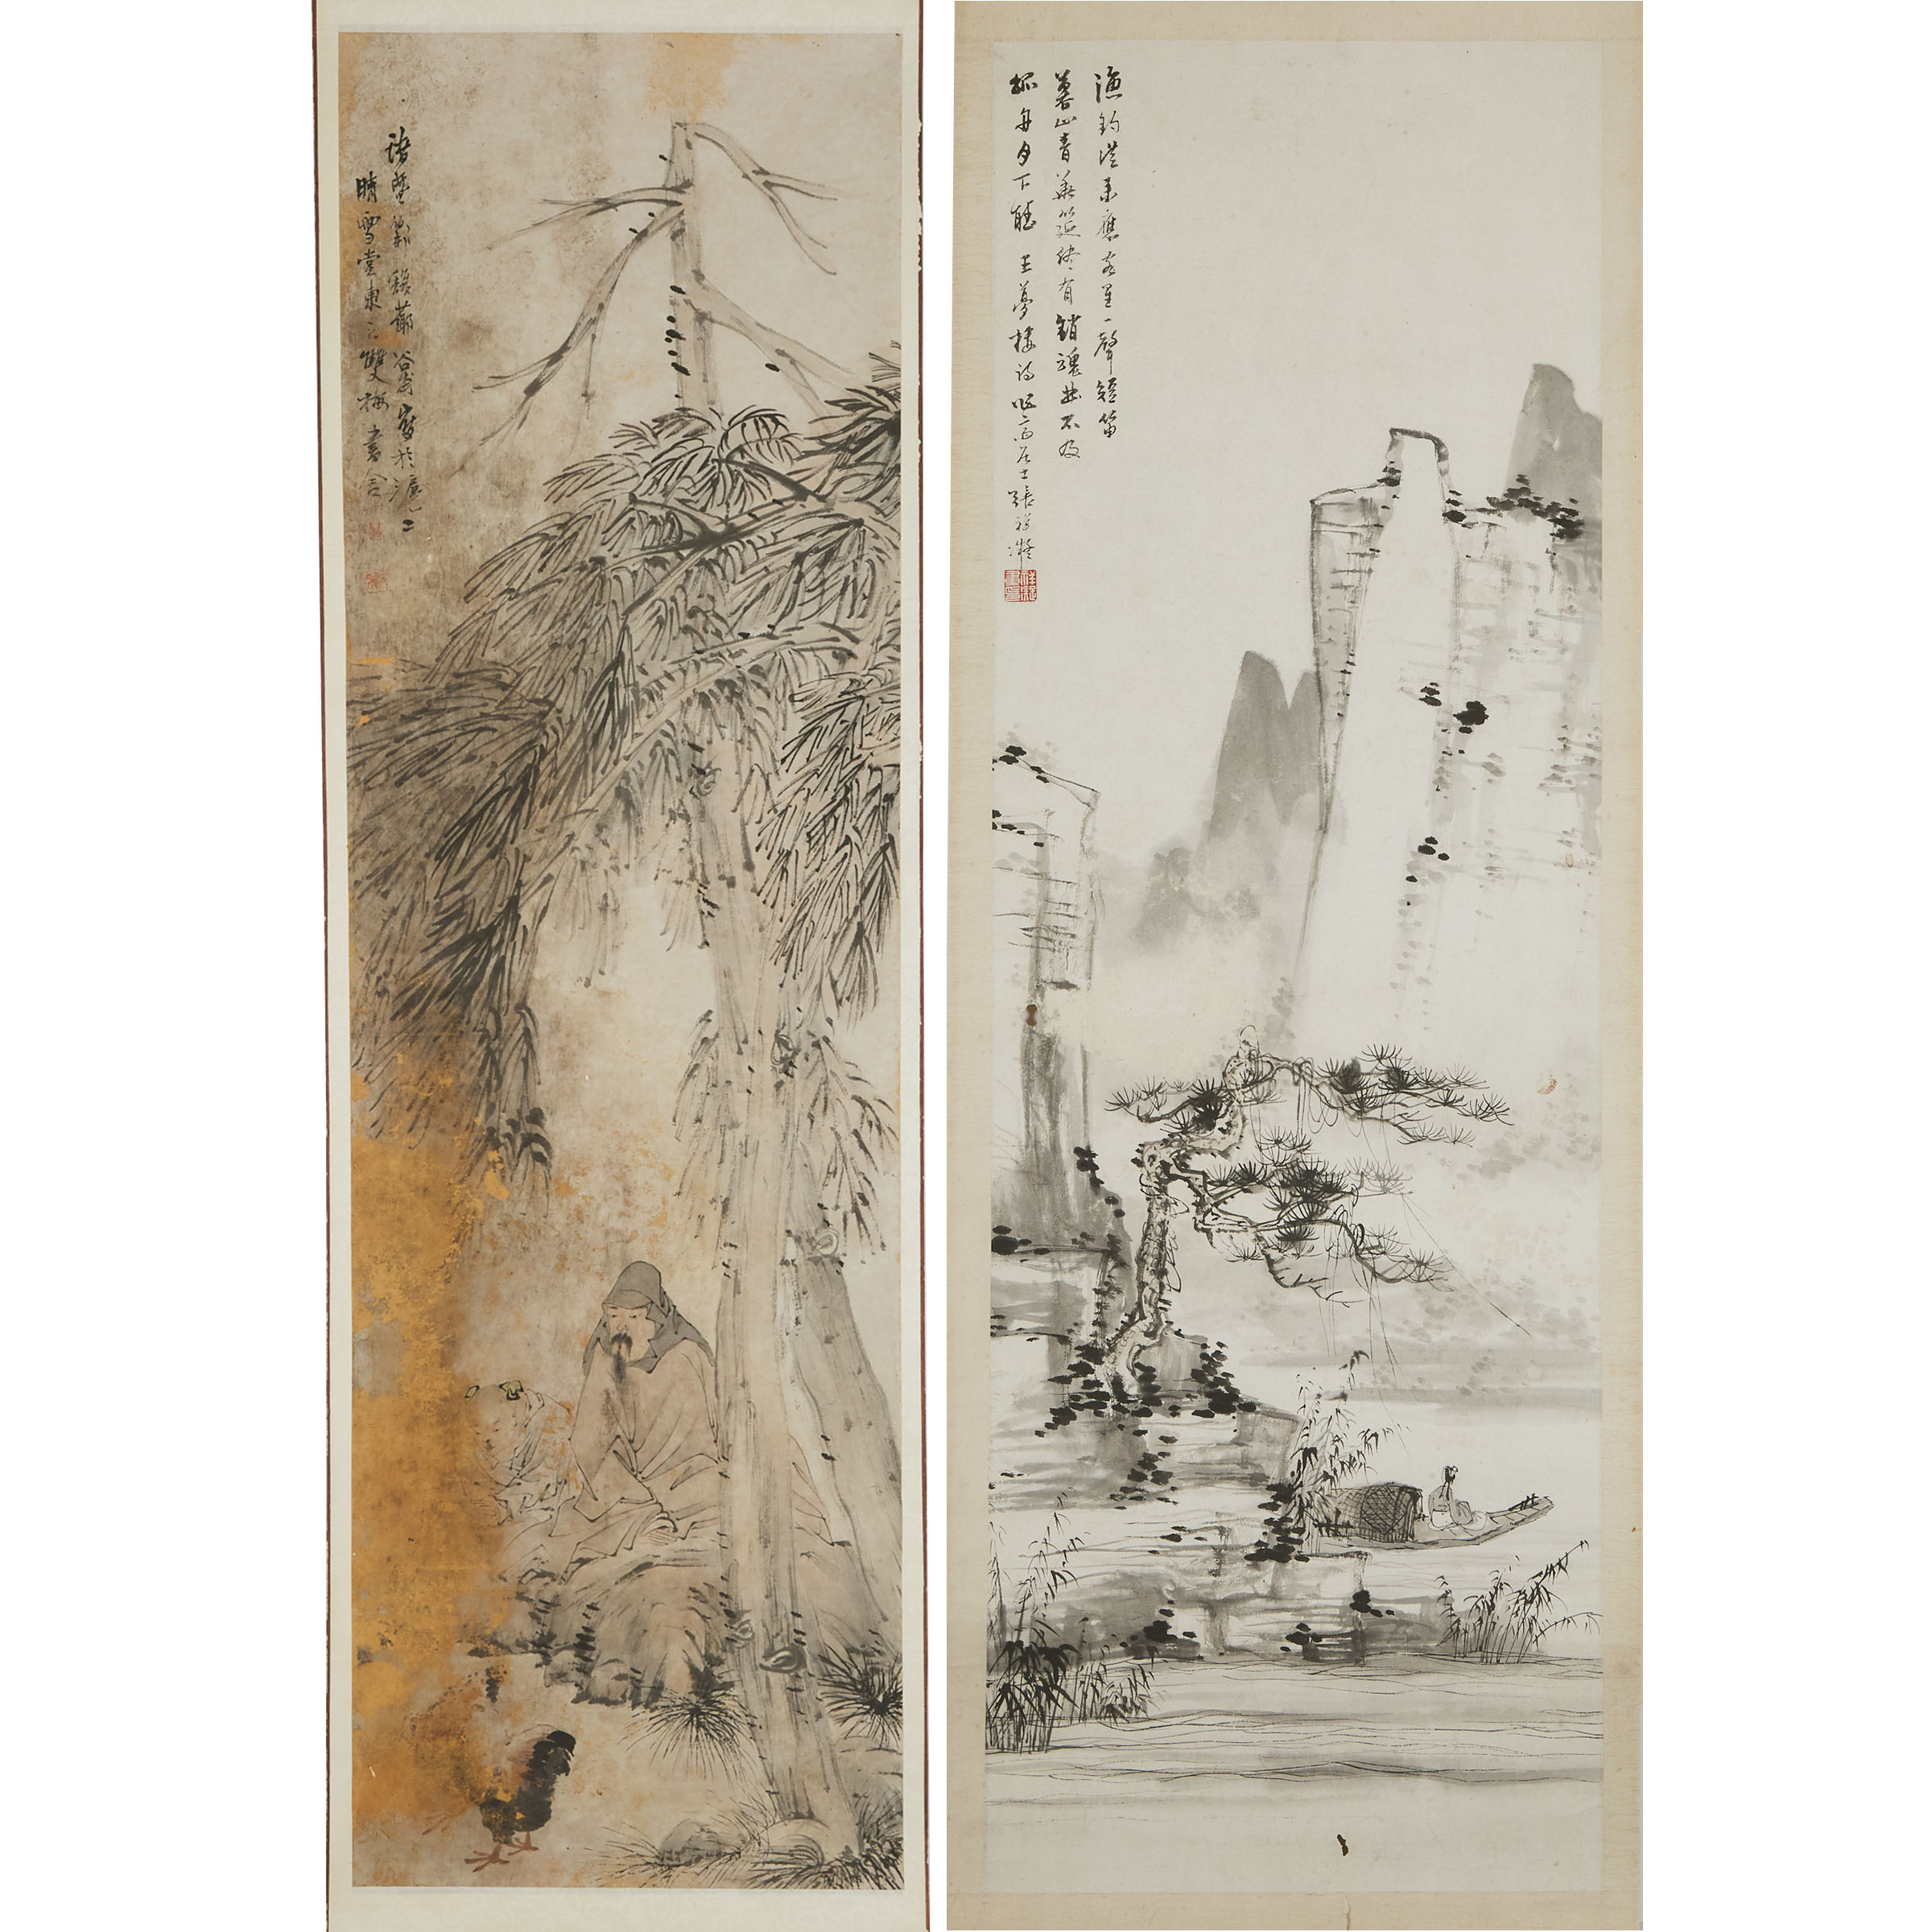 Zhang Xiangning (1911-1958) and Li Fu (Qing Dynasty), Two Paintings of a Scholar and a Landscape